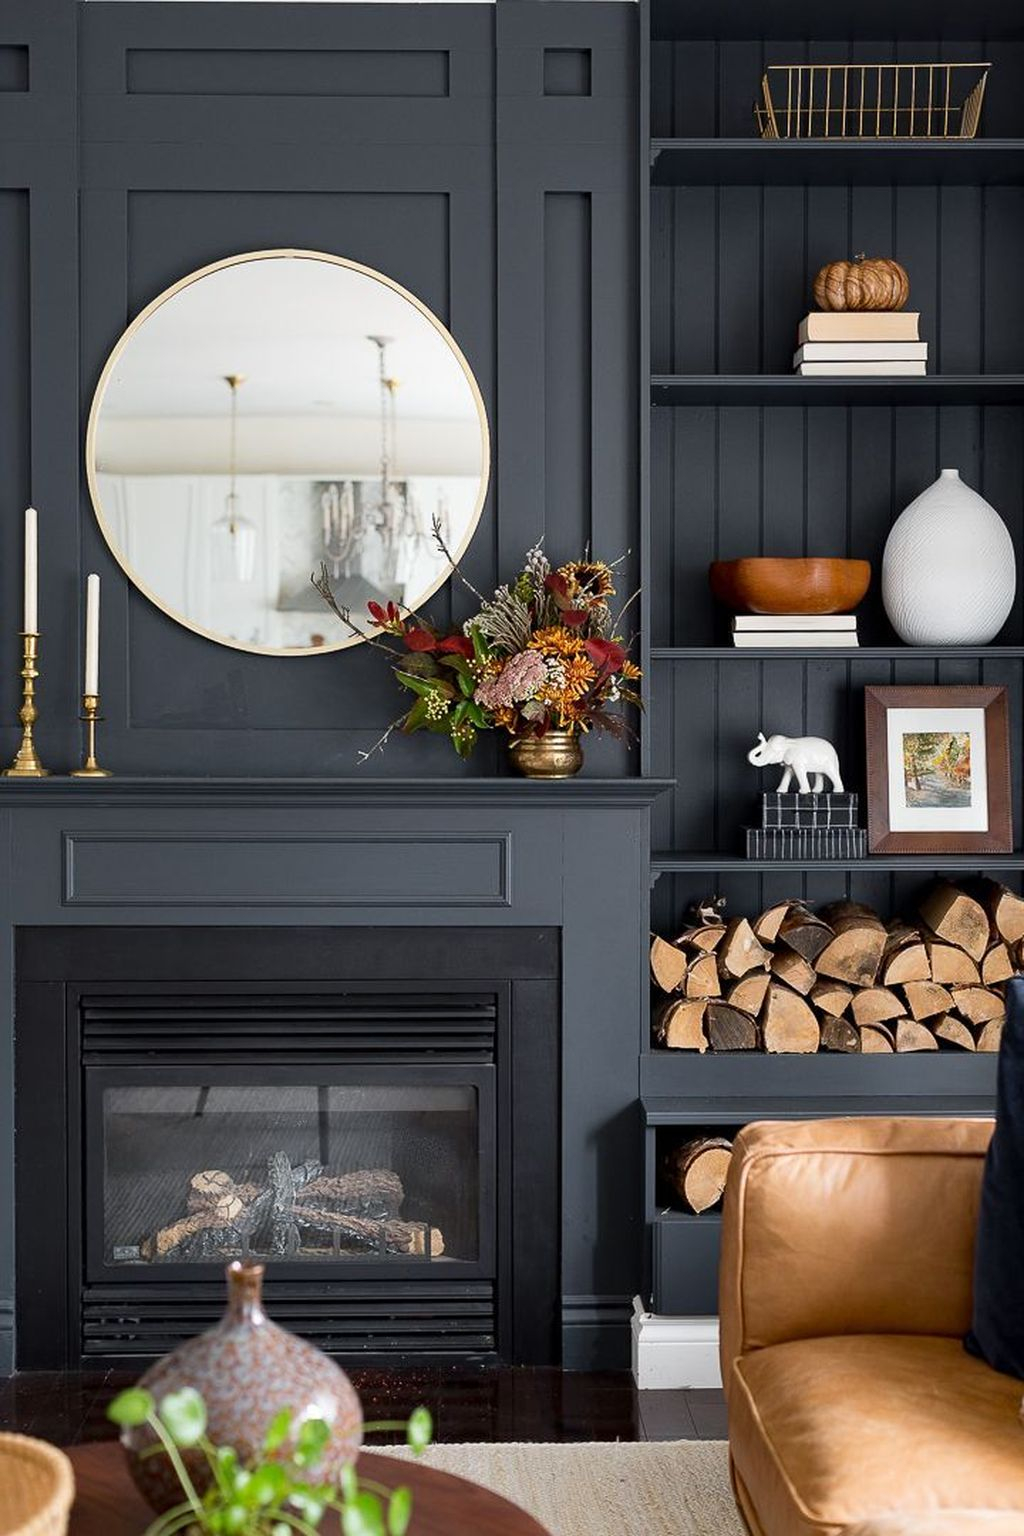 Fabulous Interior Design Ideas For Fall And Winter To Try Now33